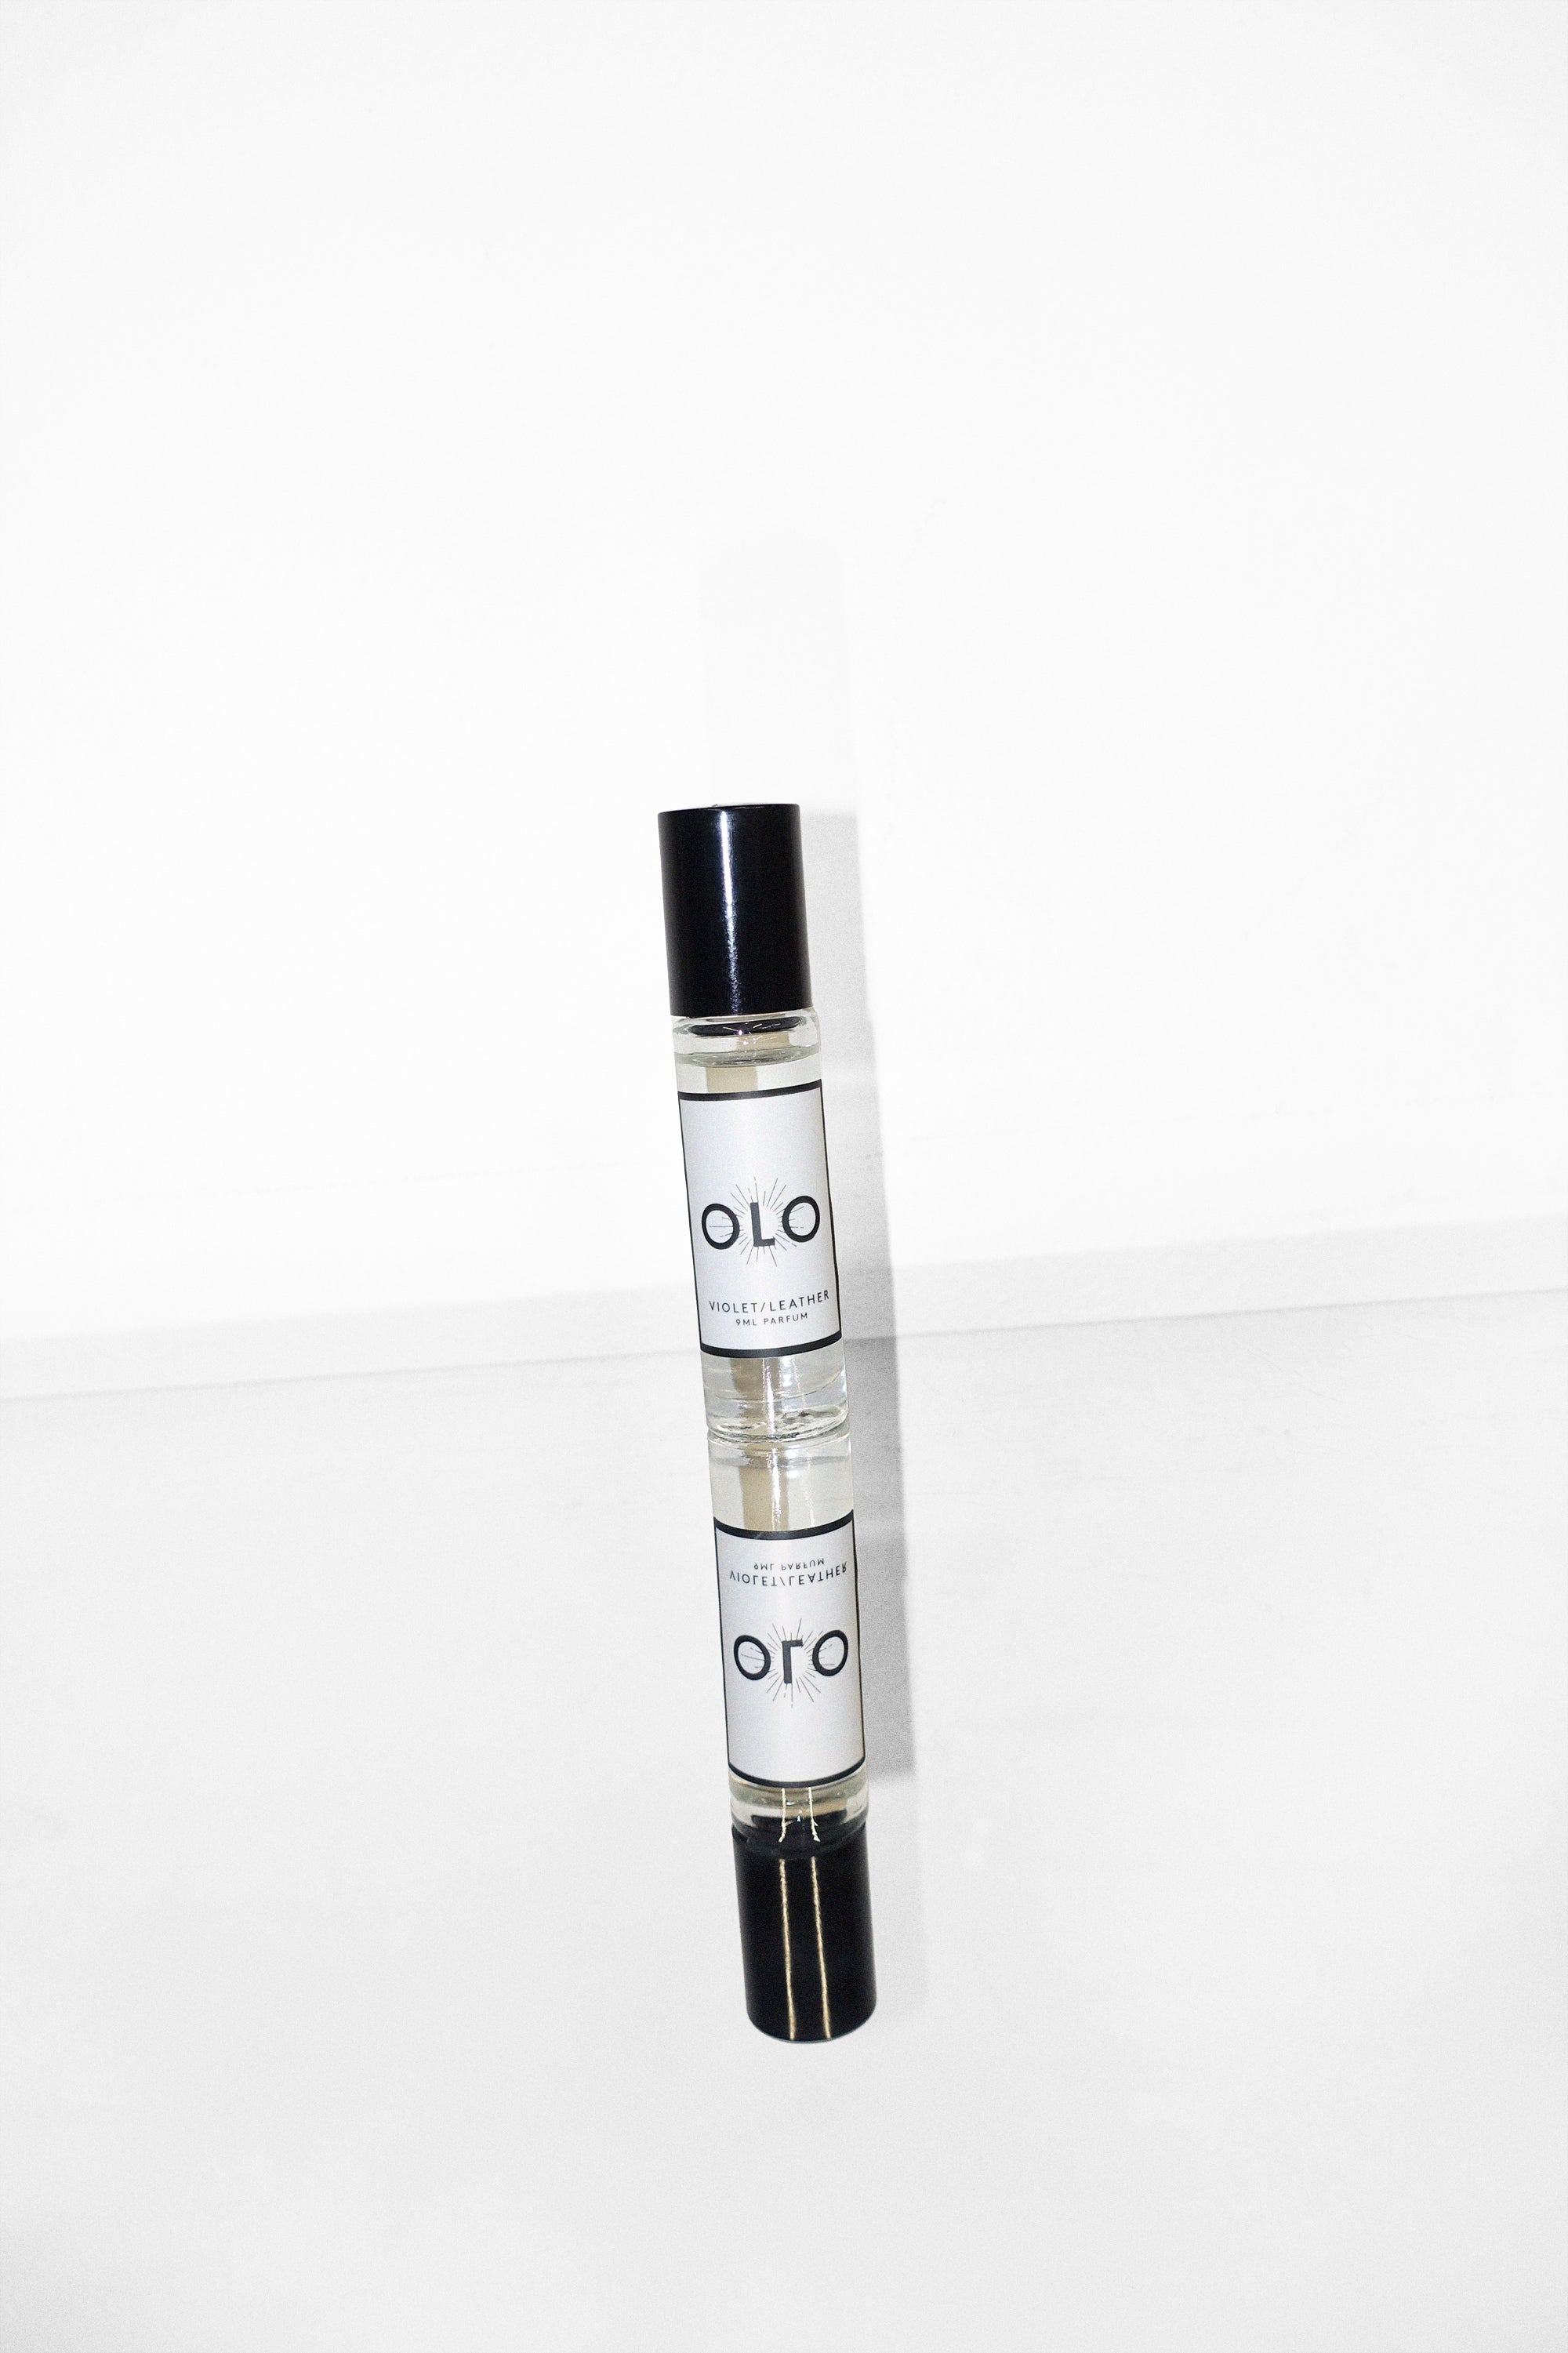 Violet / Leather - 9ml Parfum by Olo